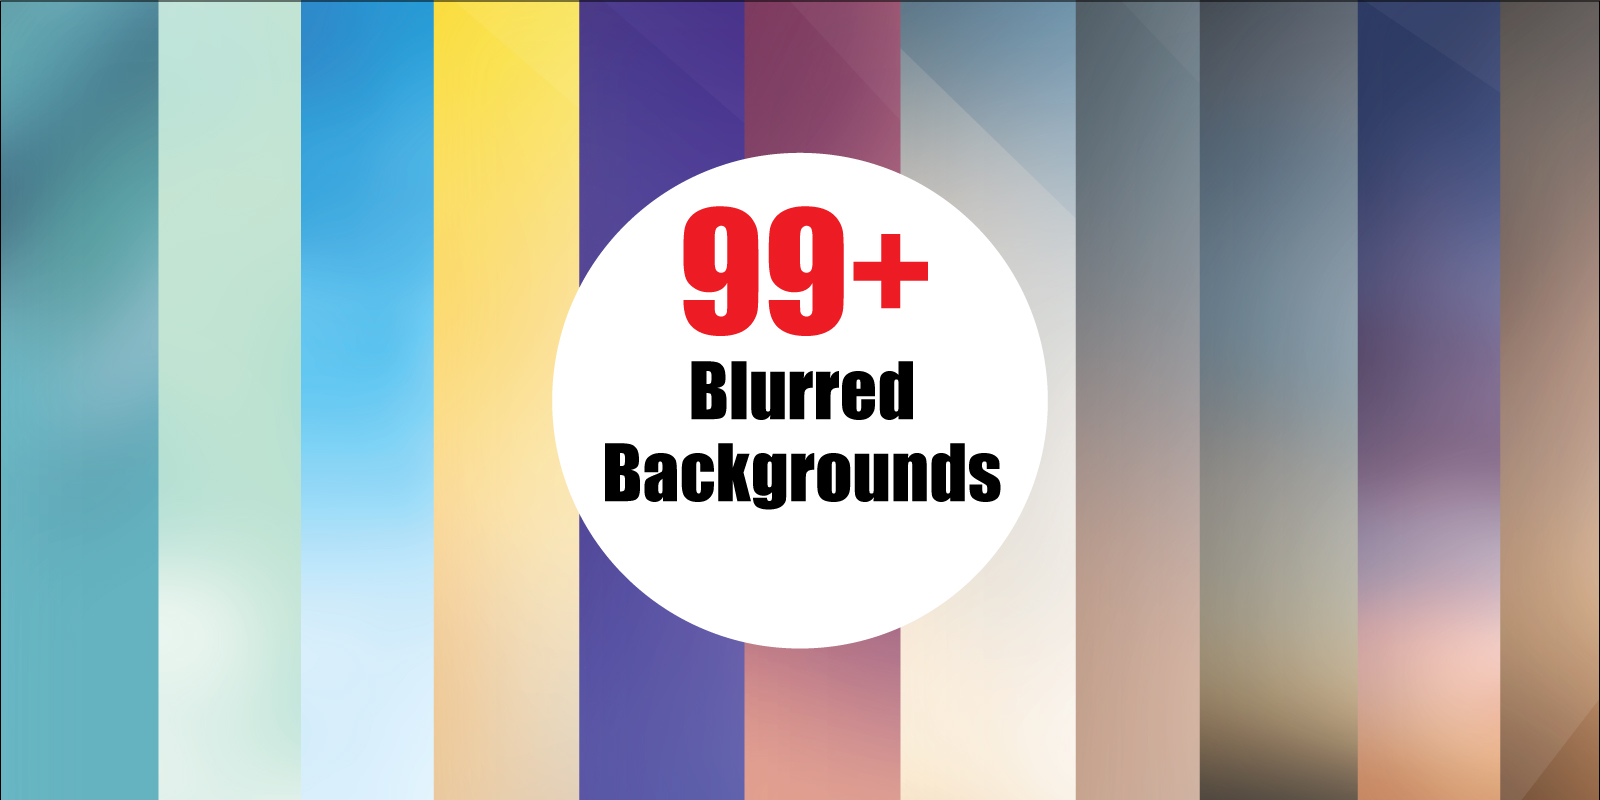 99+ Blurred Backgrounds Collection: High-Quality Images for Your Design Projects